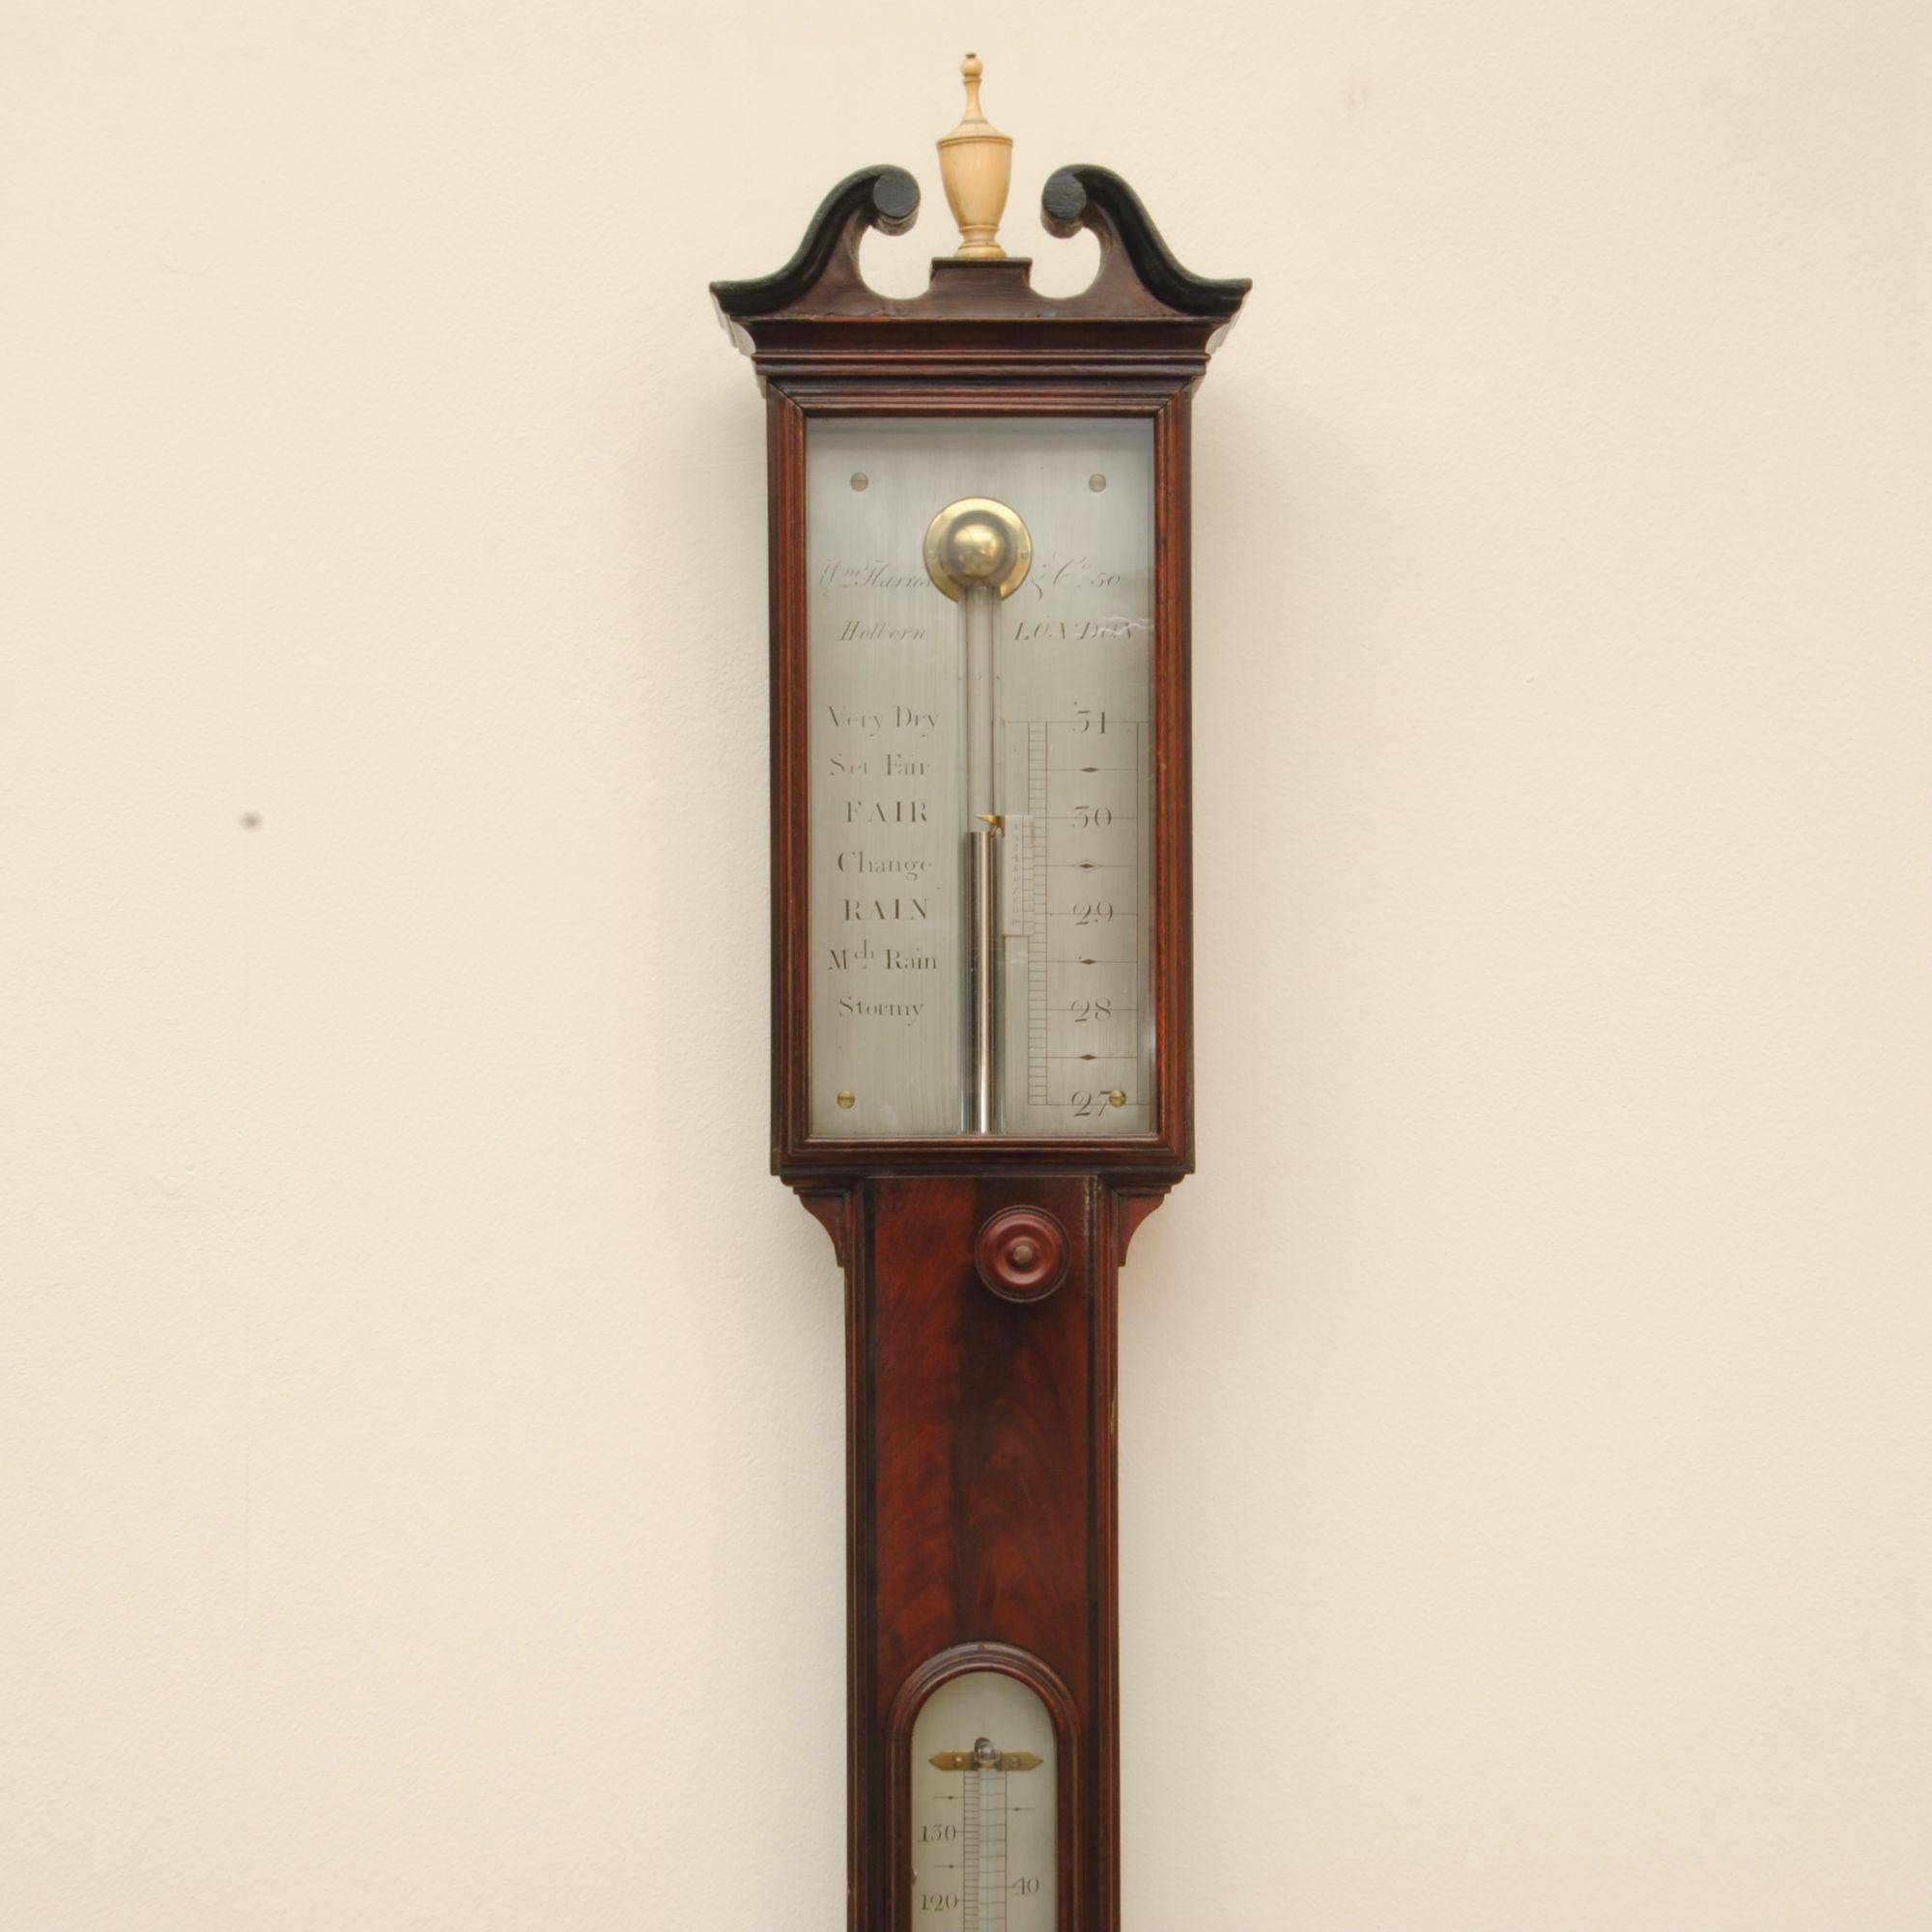 A Regency period mahogany stick barometer of fine quality with flame veneers and ebony stringing, the silvered dial signed by William Harris, Holborn, London
The original ivory finial is registered on the ivory list, number available on request.